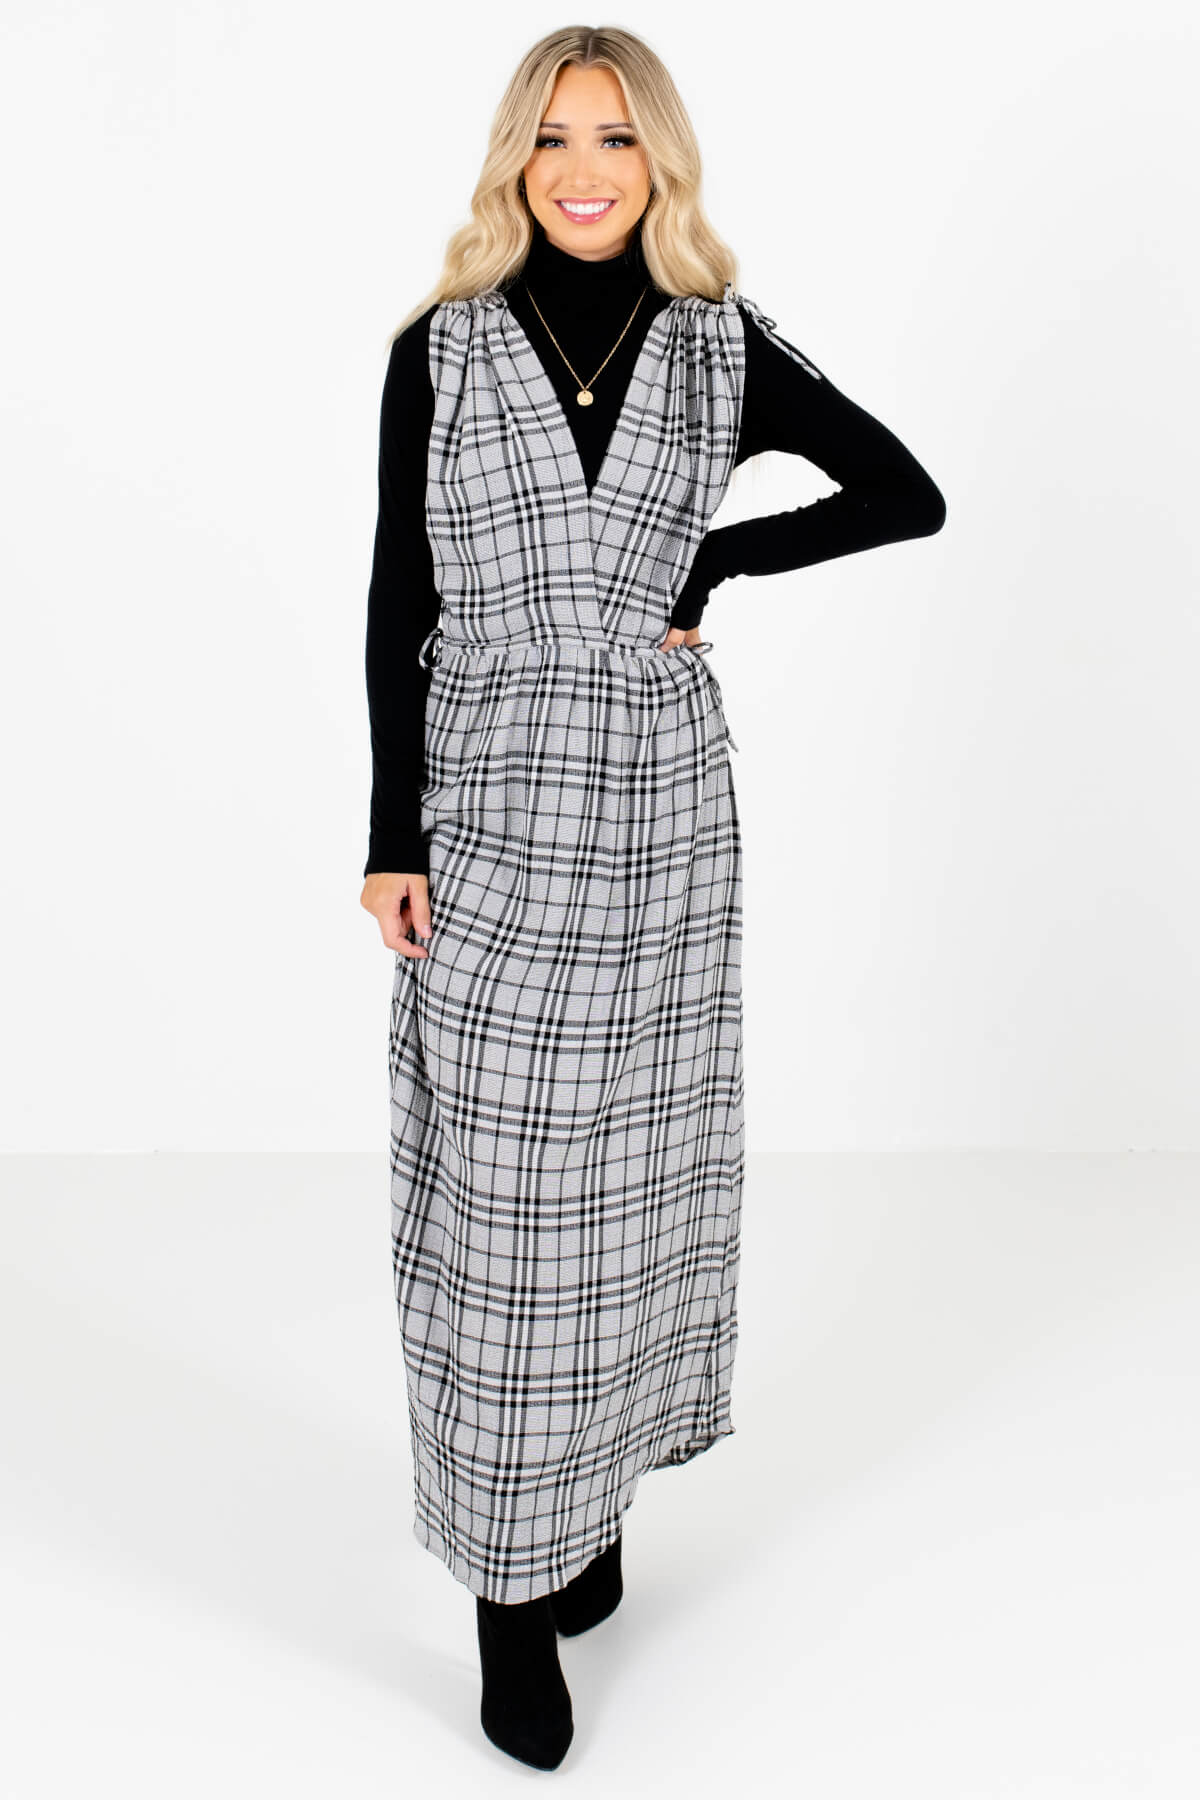 Gray and Black Plaid Patterned Boutique Maxi Dresses for Women